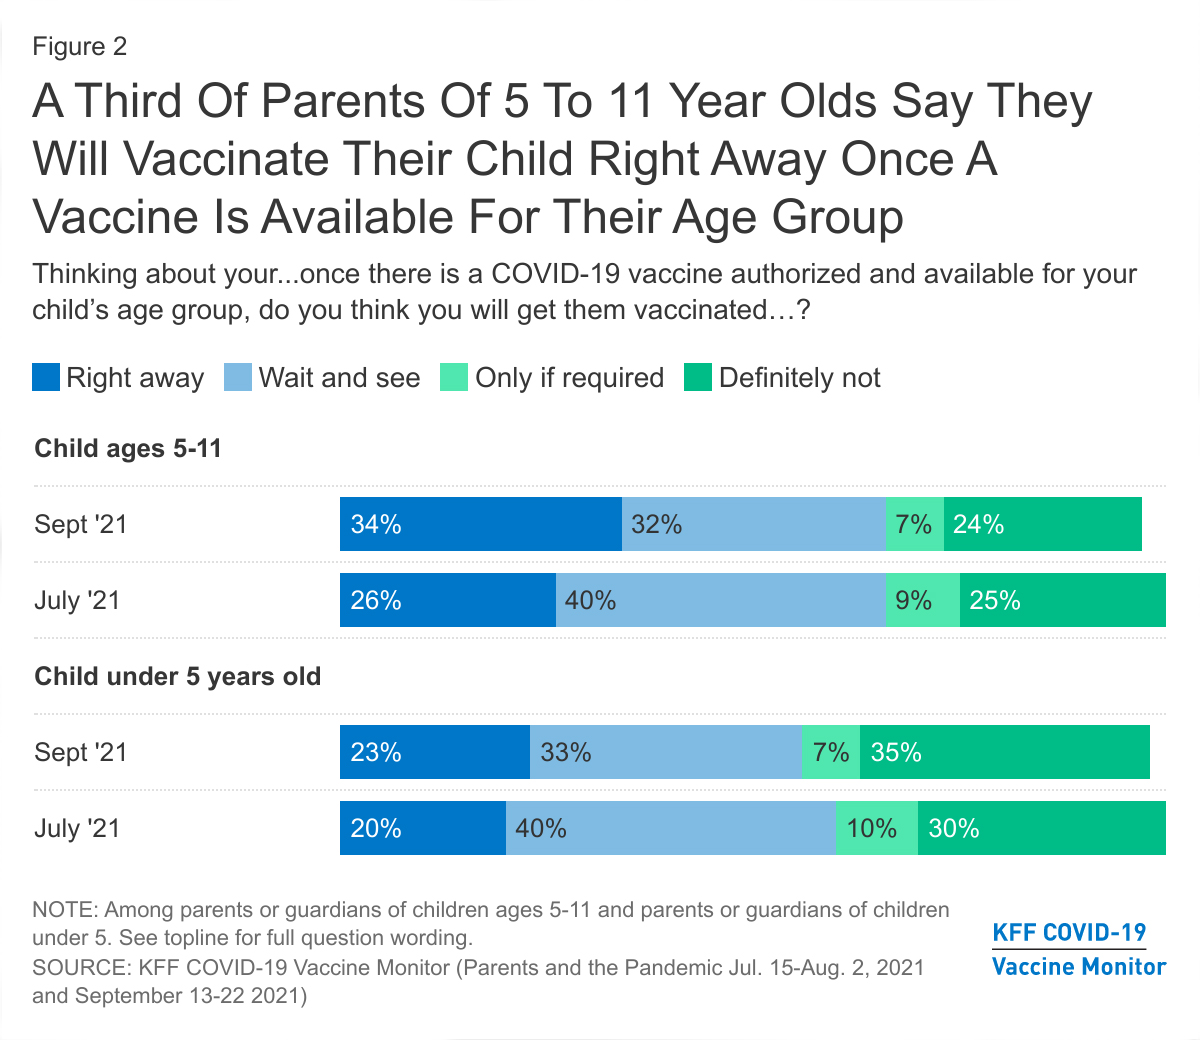 A chart shows the percentages of the position toward COVID-19 vaccines by parents of children ages 5-11 and under 5 years old.